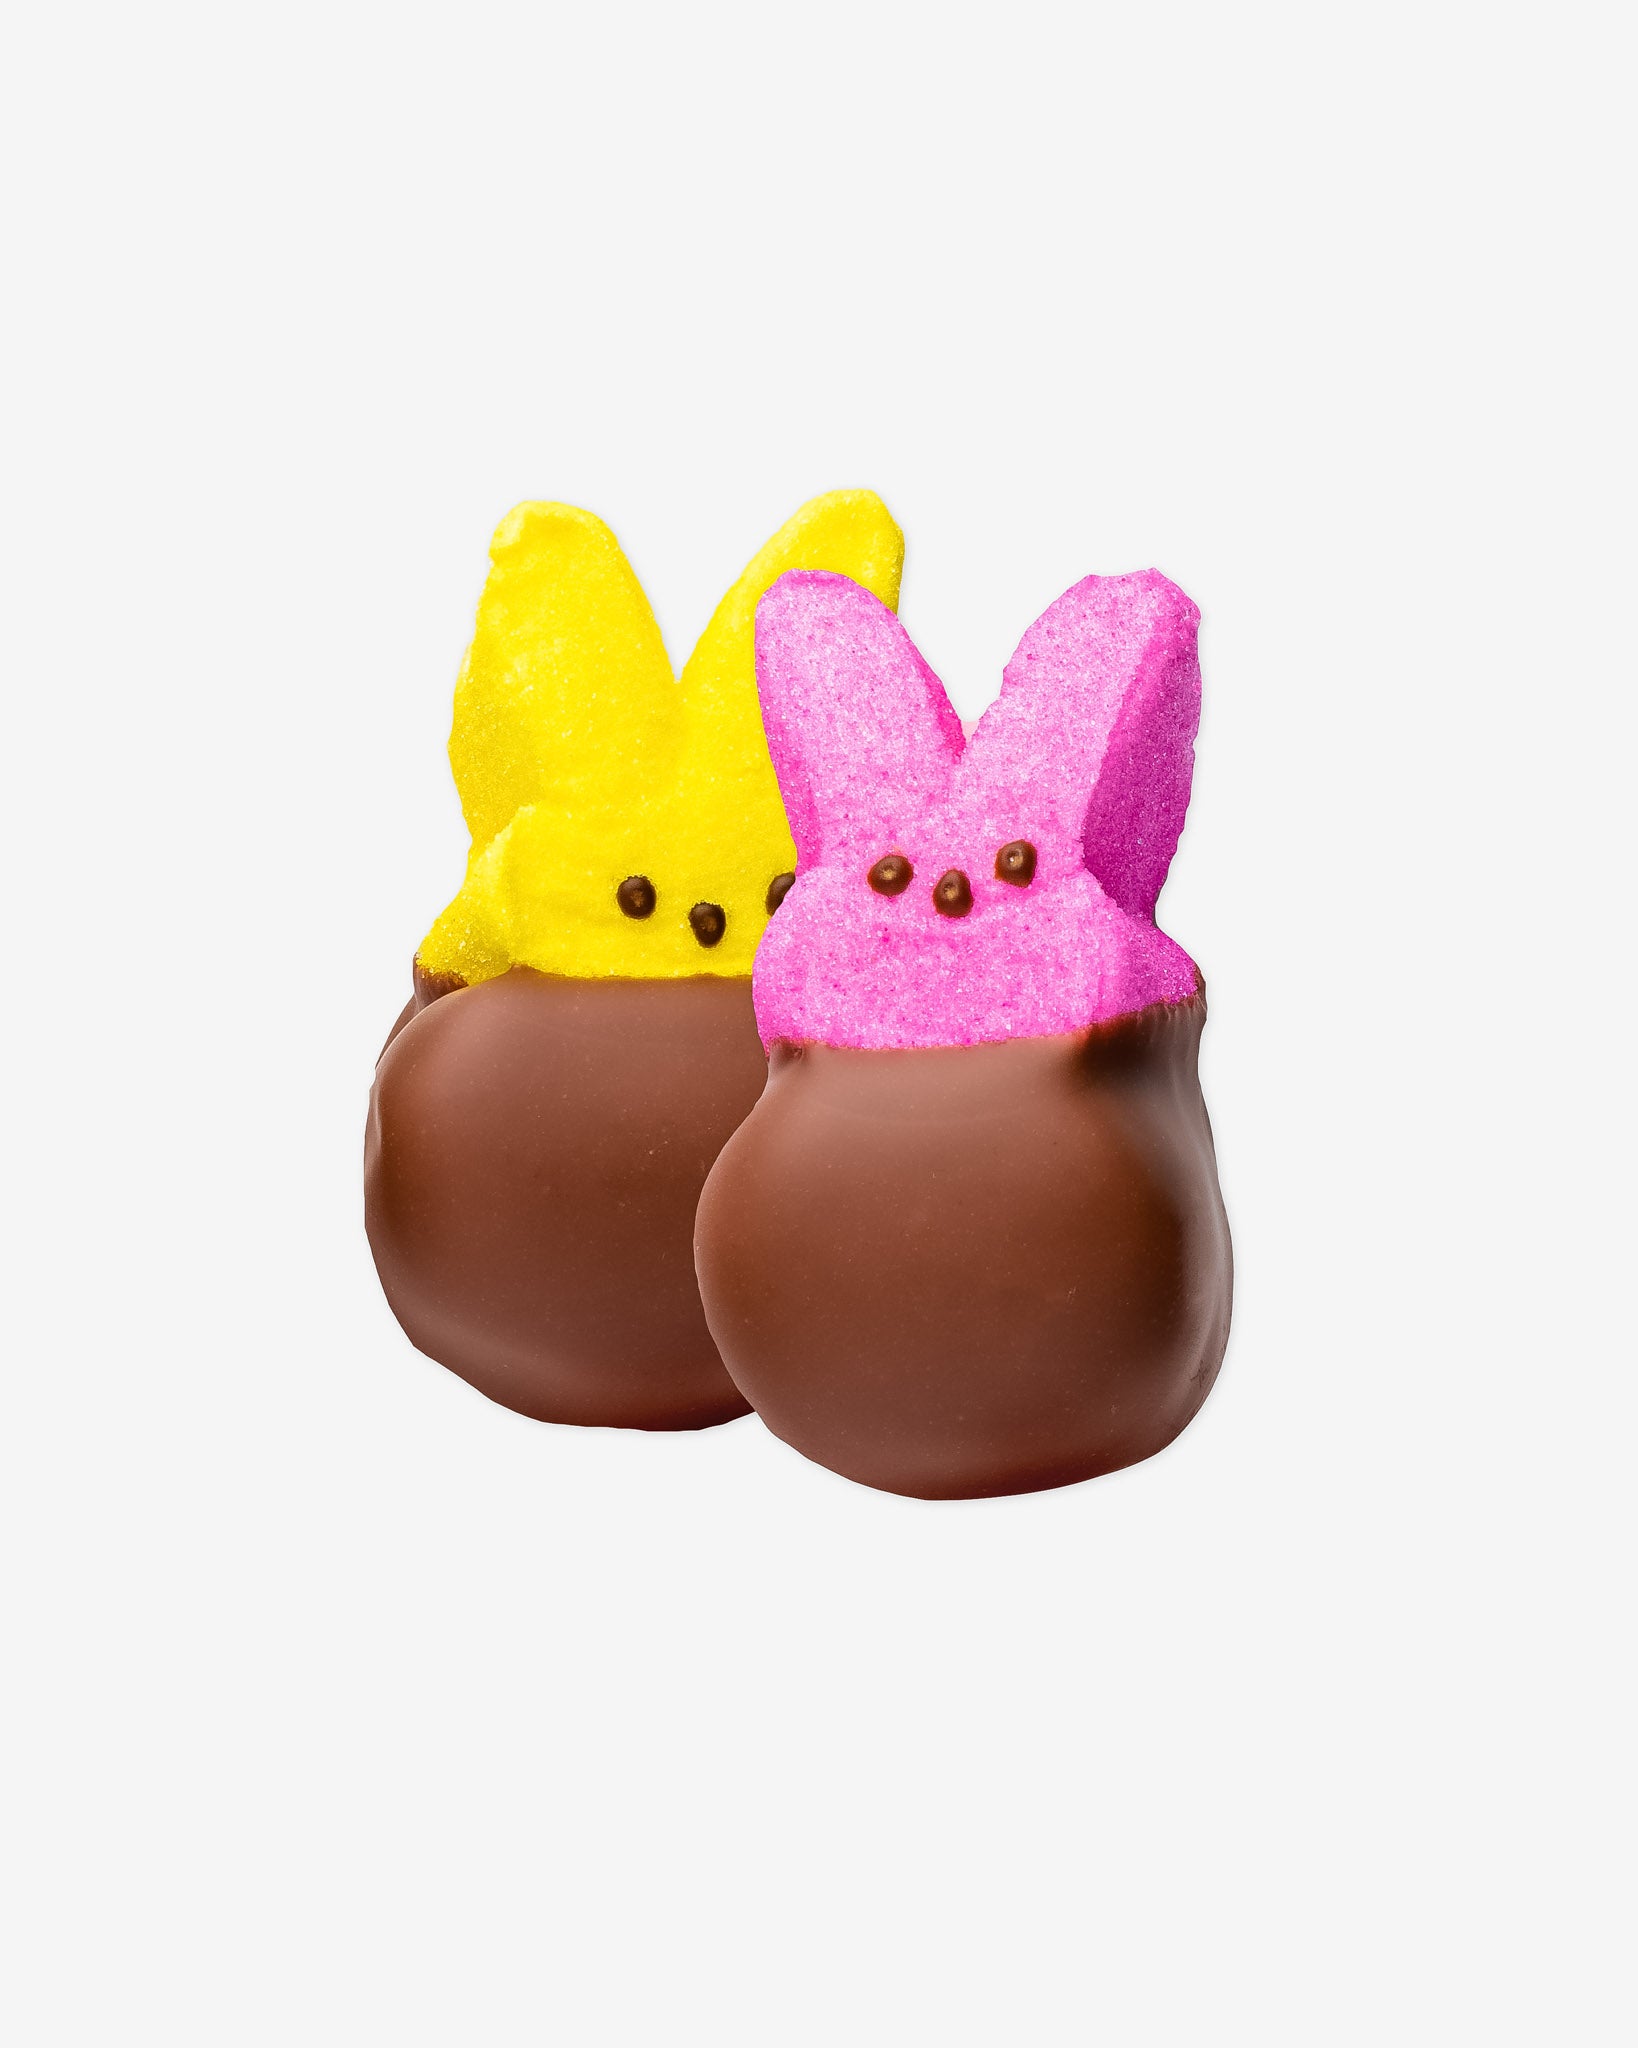 easter peeps images